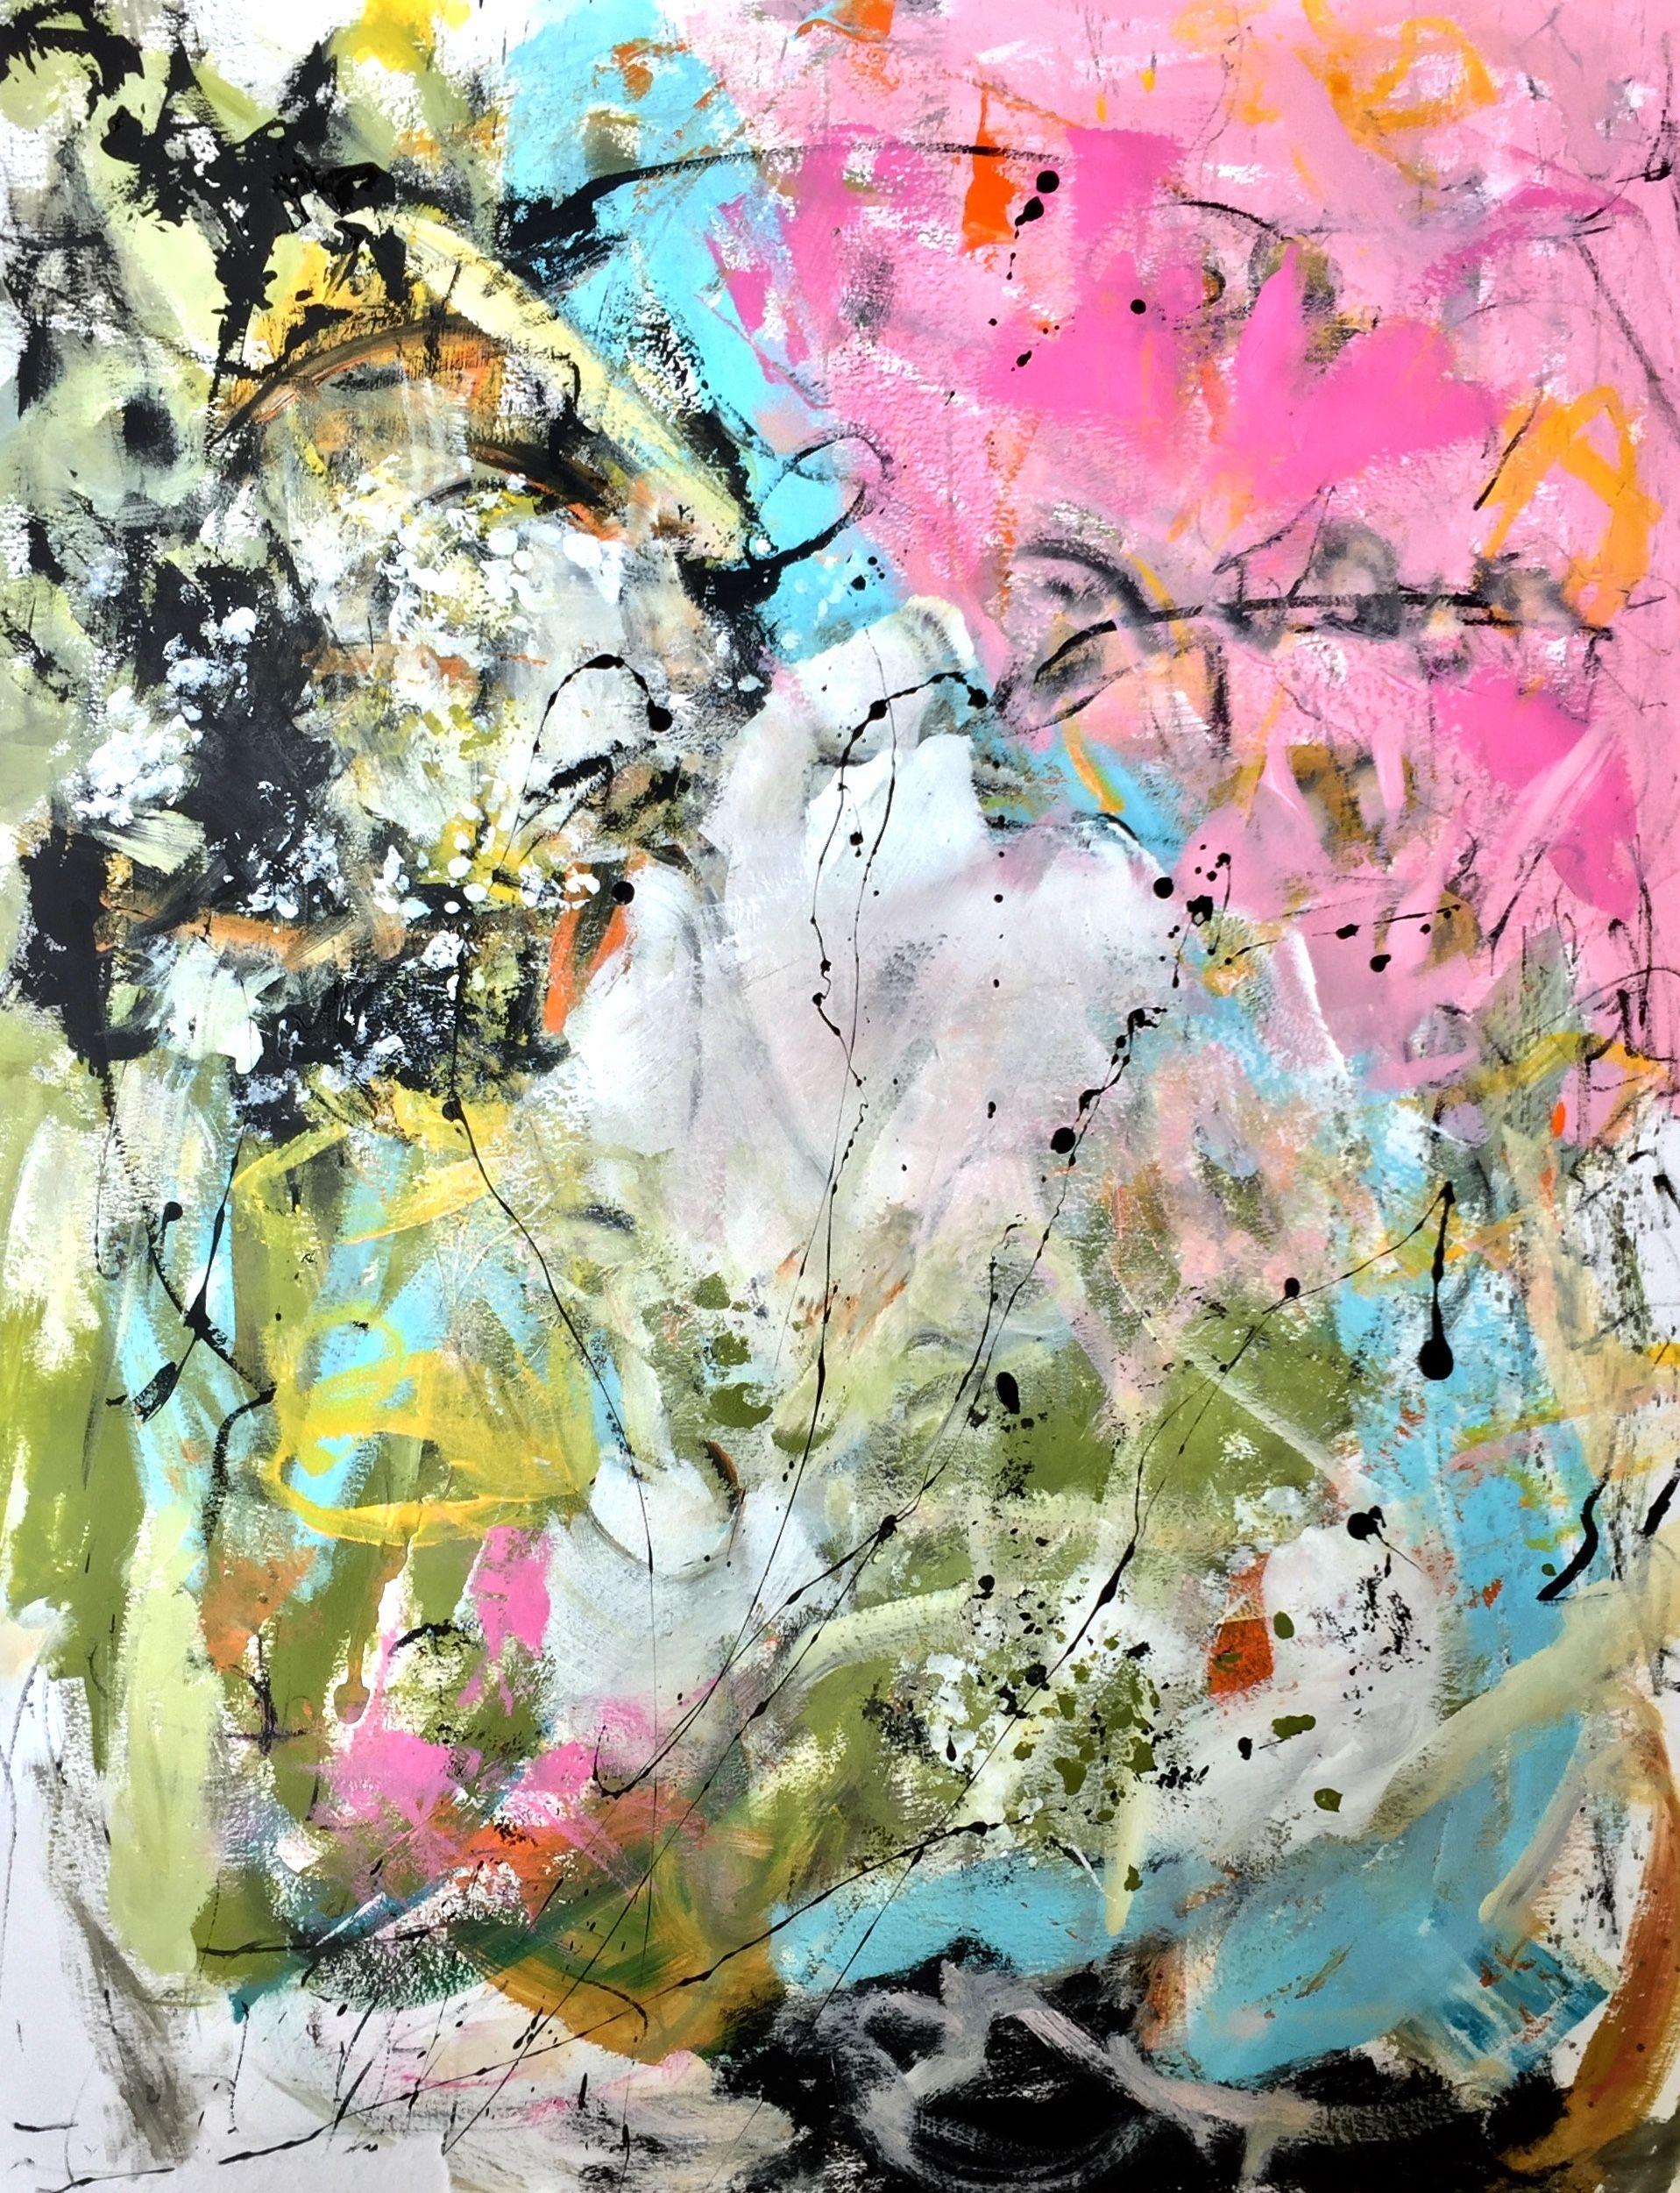 "When the Wind Blows" is an abstract, gestural-dynamic acrylic painting on thick paper. The main colors are pink, white, green, turquoise and black.  Without a doubt, times are rough at times and the wind blows towards us. But the next pink cloud,